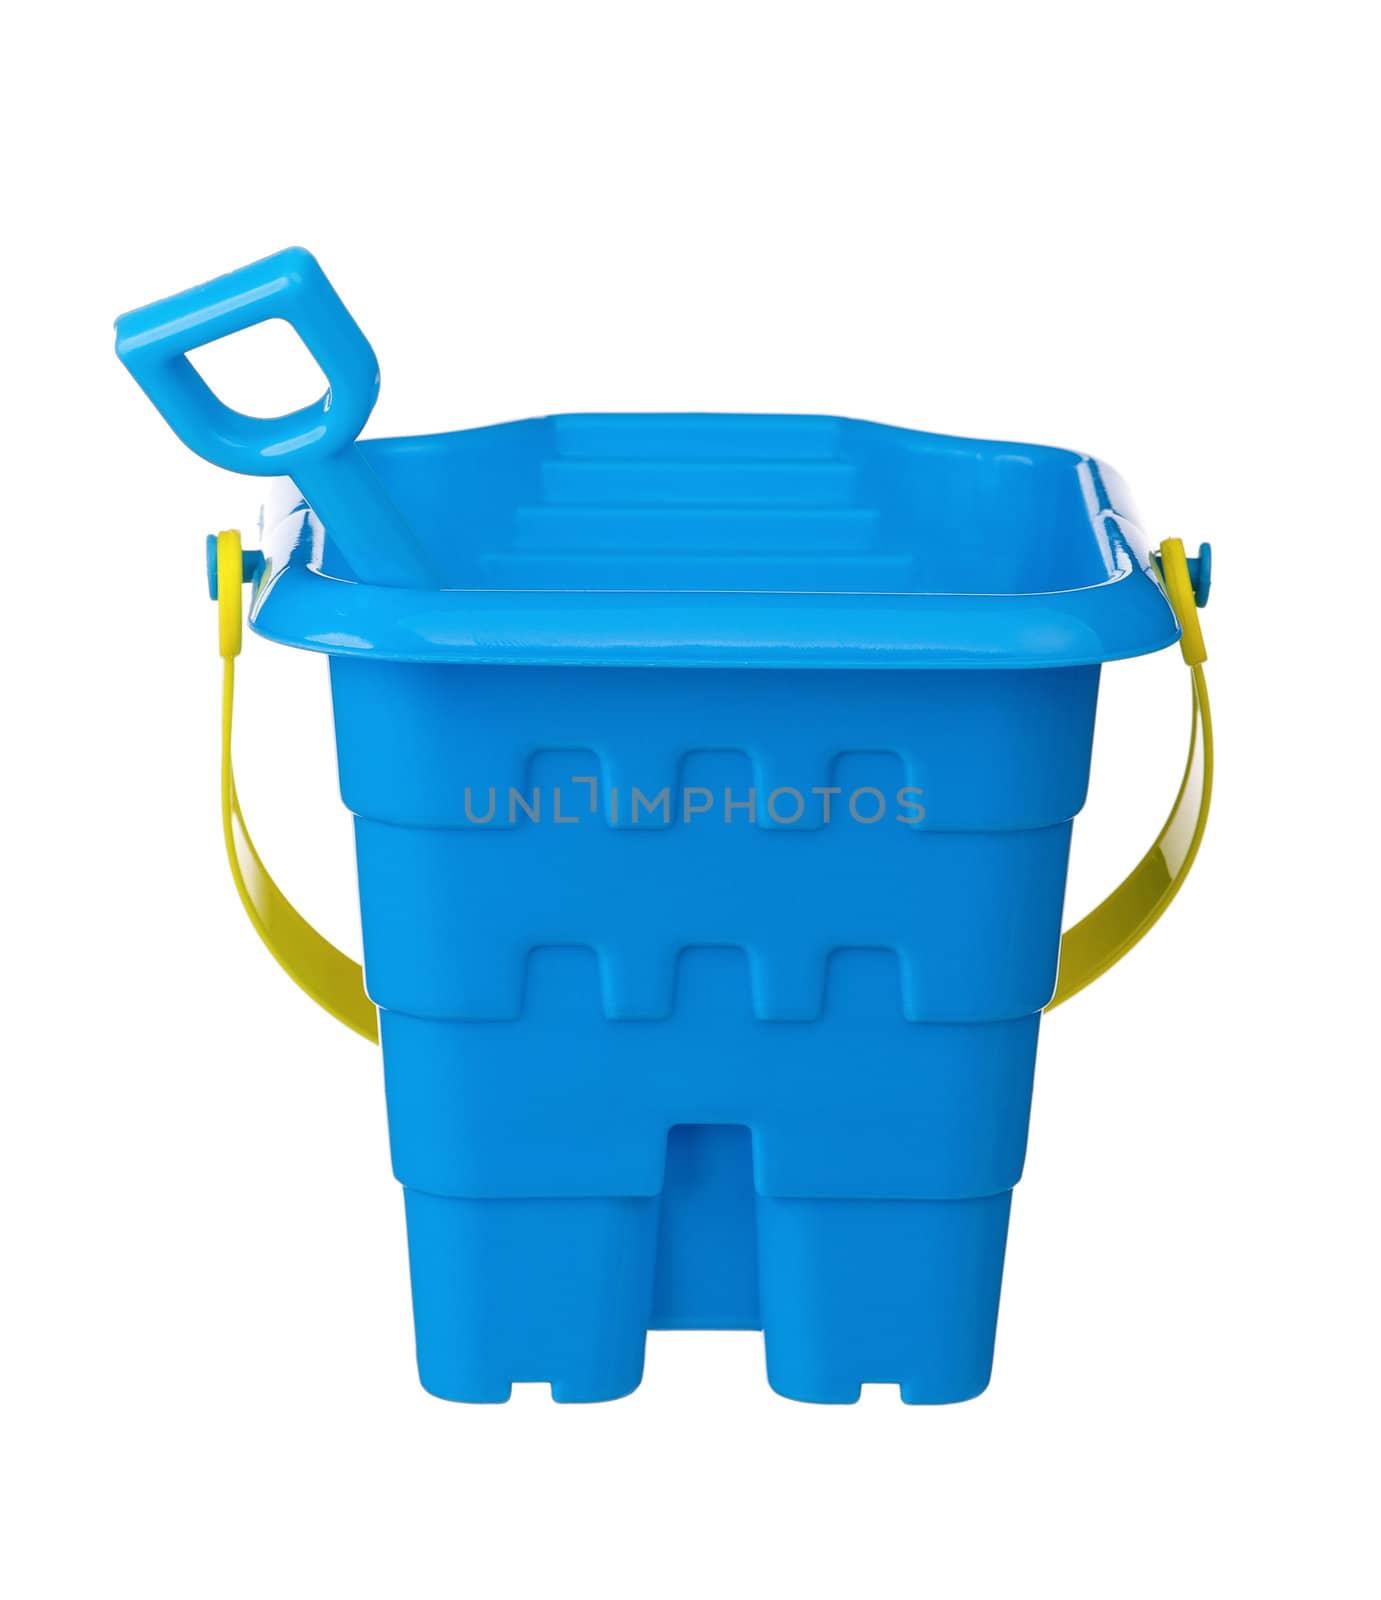 Toy bucket and spade by fotostok_pdv